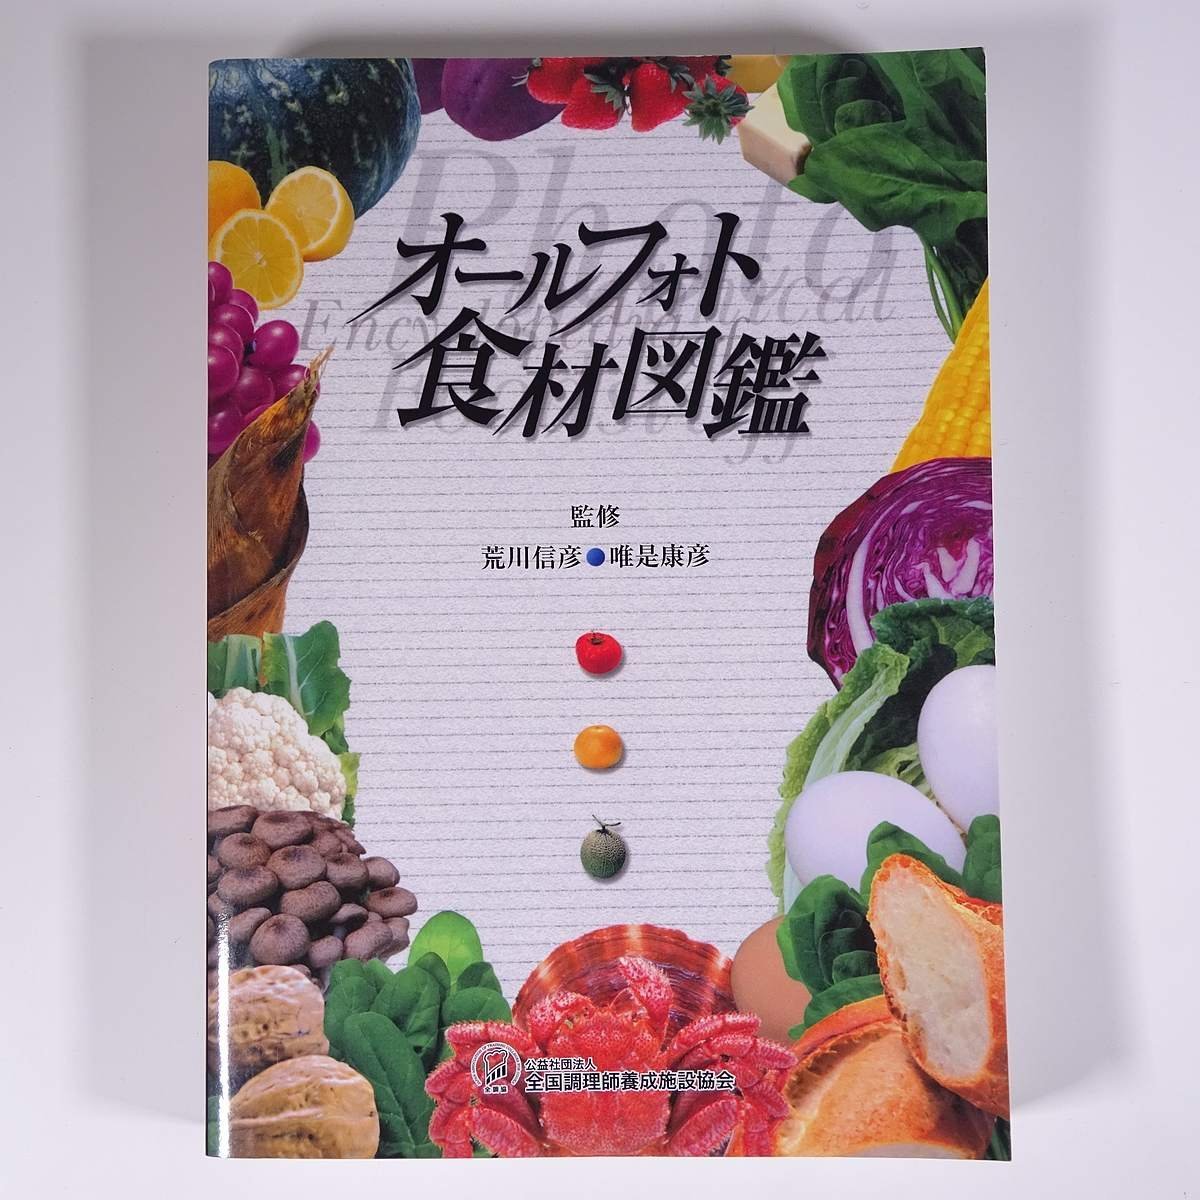  all photo food ingredients illustrated reference book ..*. river confidence .*.... all country cooking ... facility association 2018 large this drawing version llustrated book cooking vegetable kind fruits kind seafood meat another 